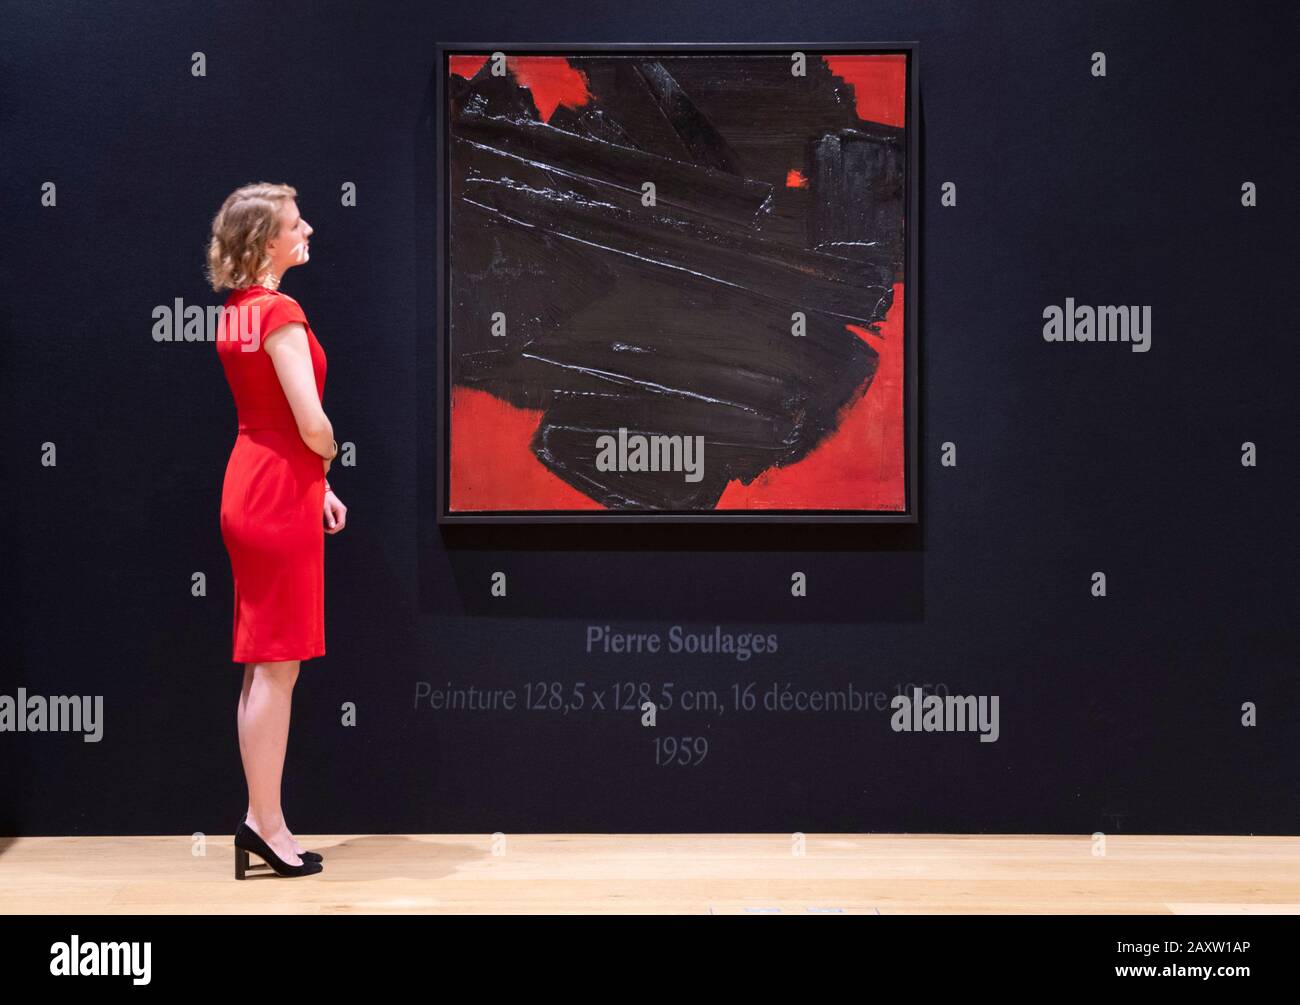 Bonhams, New Bond Street, London, UK. 13th February 2020. Peinture, 1959, French artist Pierre Soulages masterpiece will lead Bonhams Post-War & Contemporary Art Sale in London on 12 March with an estimate of £5,500,000-7,500,000. Credit: Malcolm Park/Alamy Live News. Stock Photo